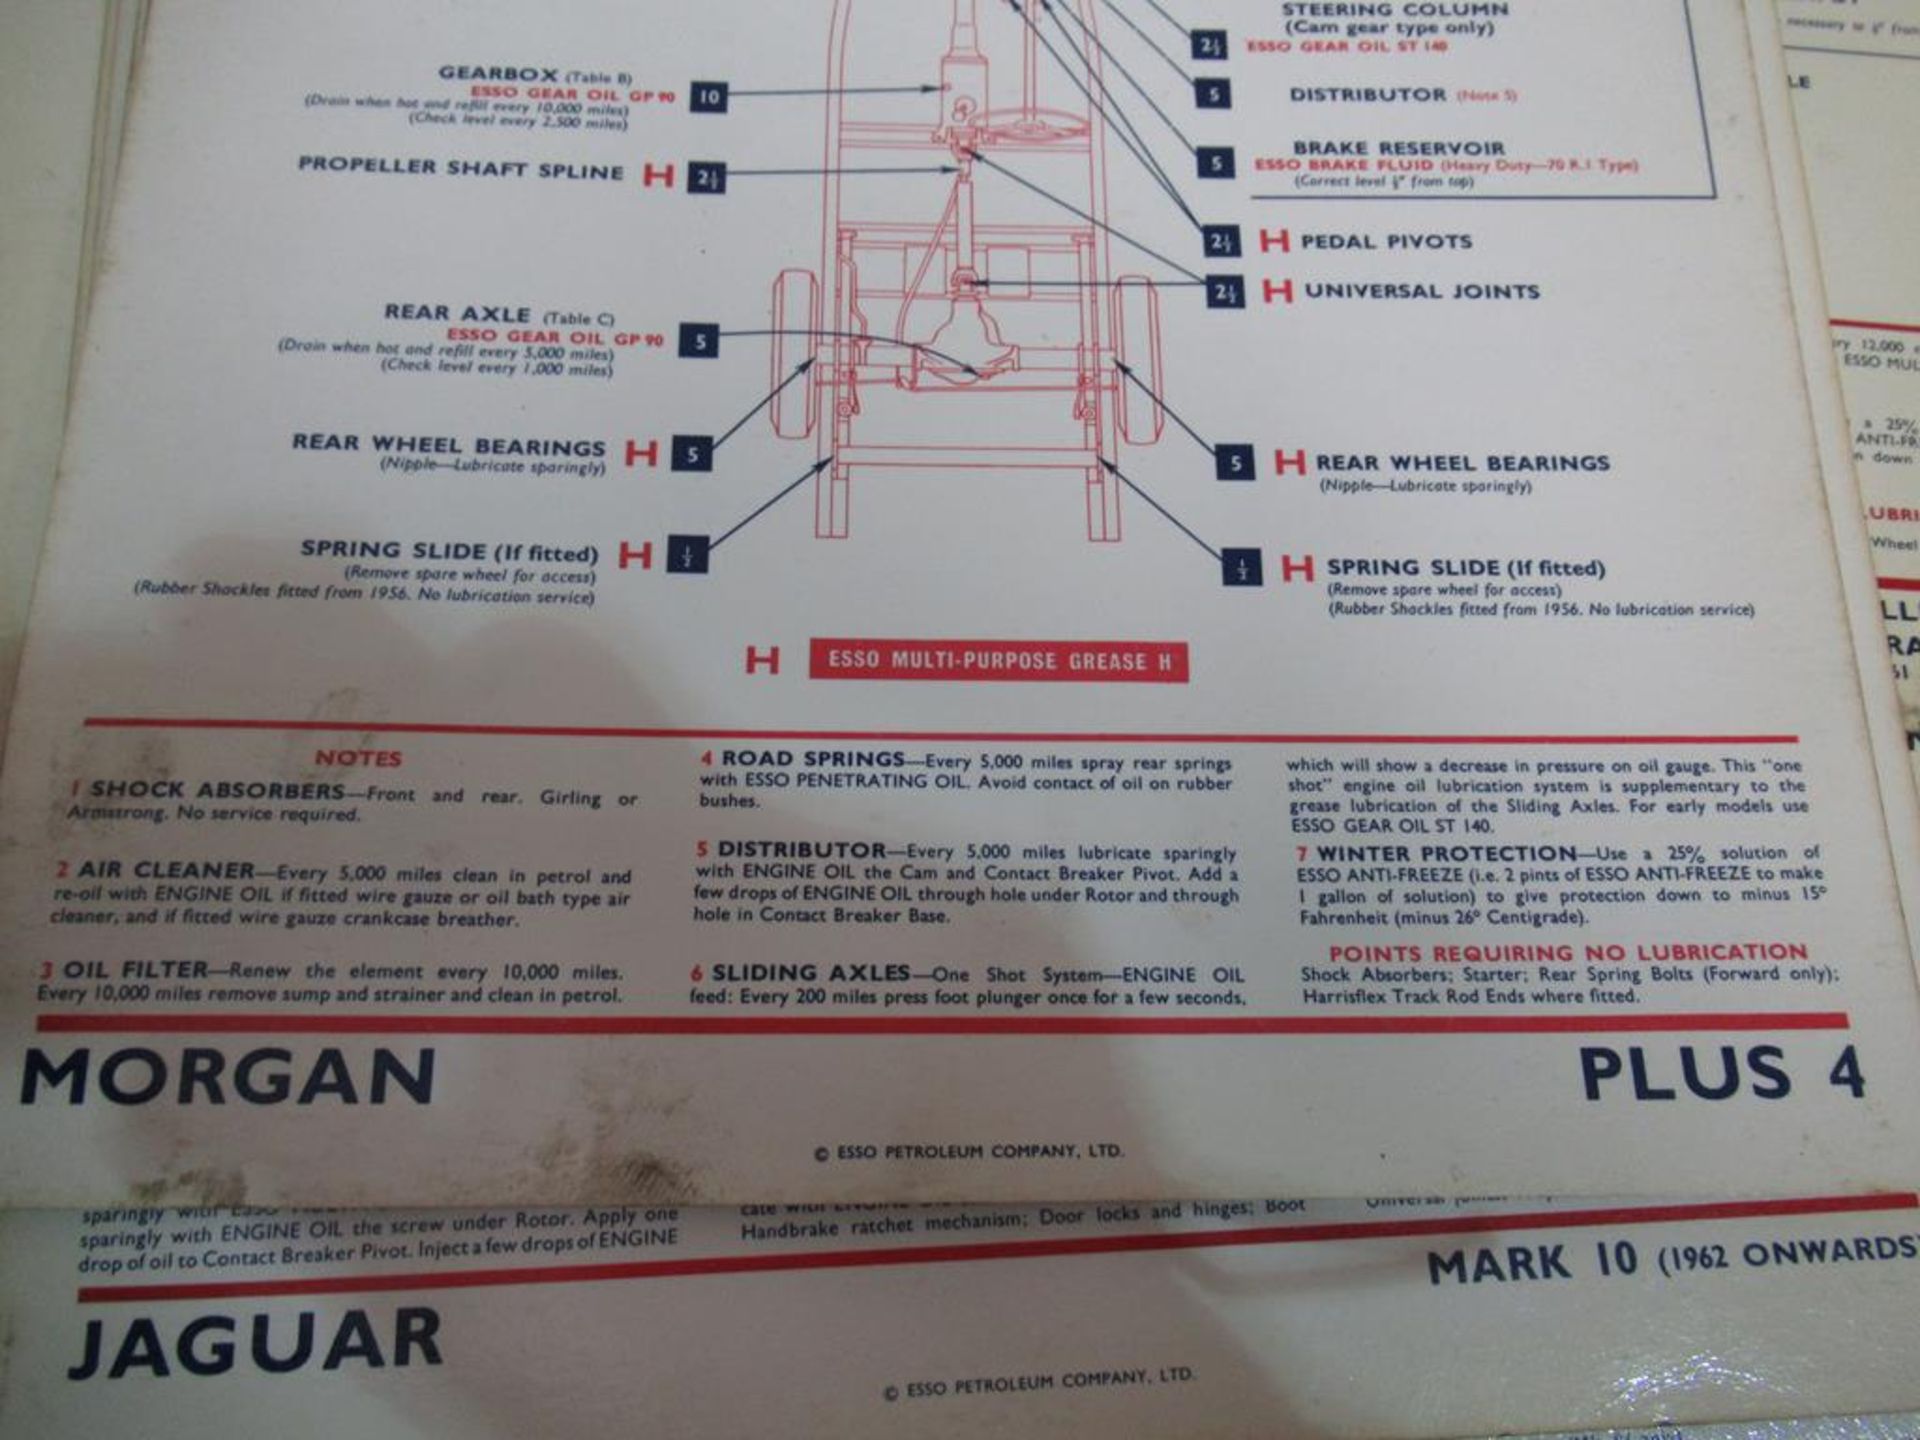 ESSO Lubrication Guides - Image 14 of 18